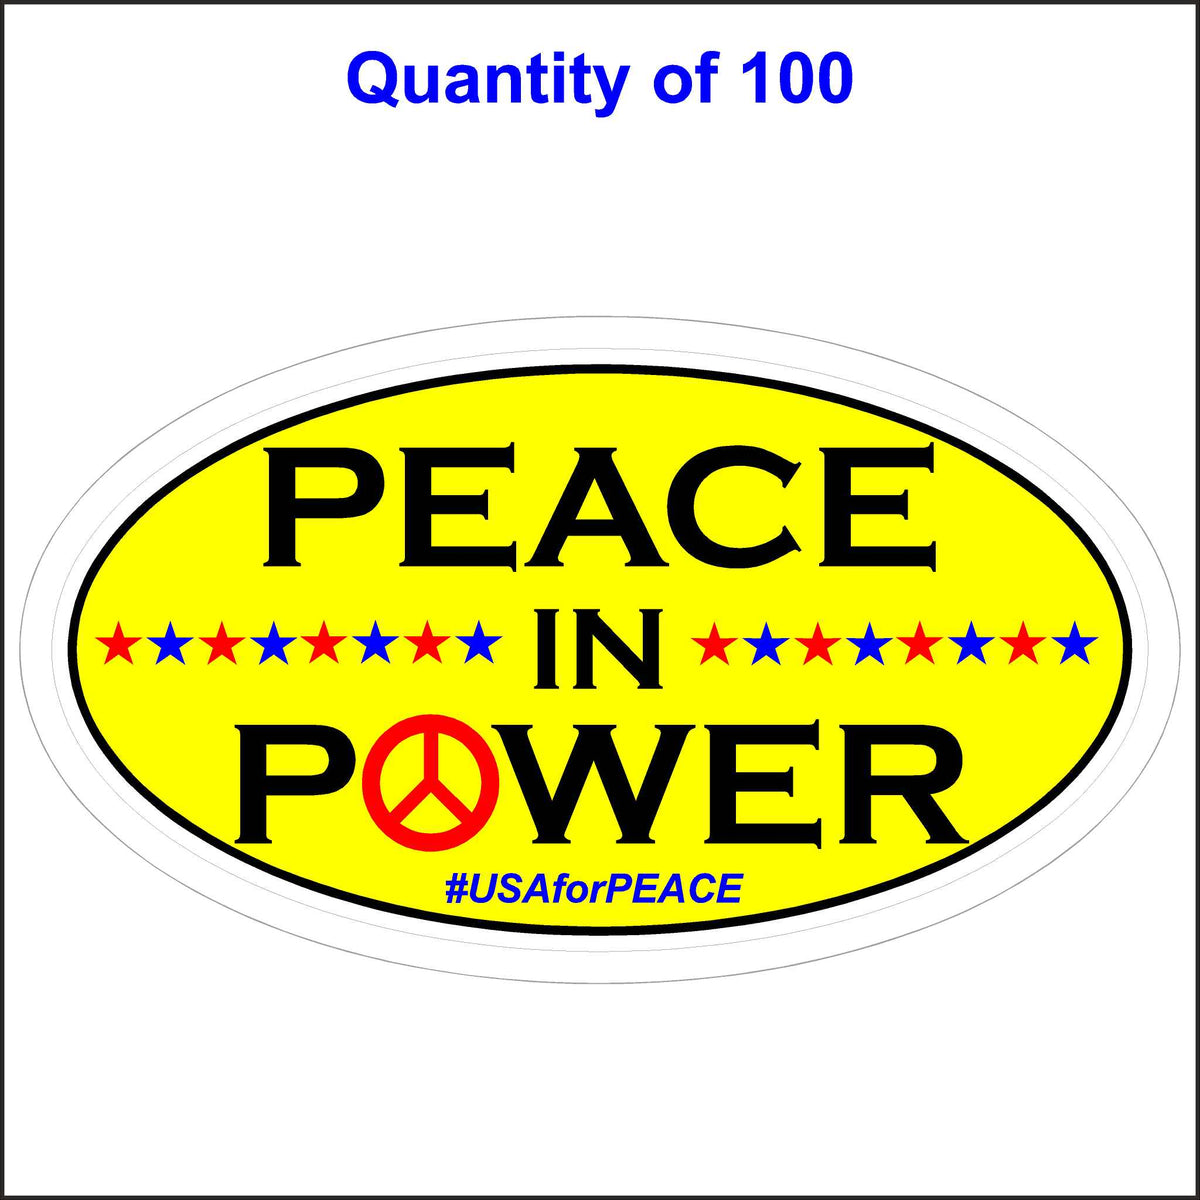 Peace in Power - Peace Sticker, USA For Peace. 100 Quantity.